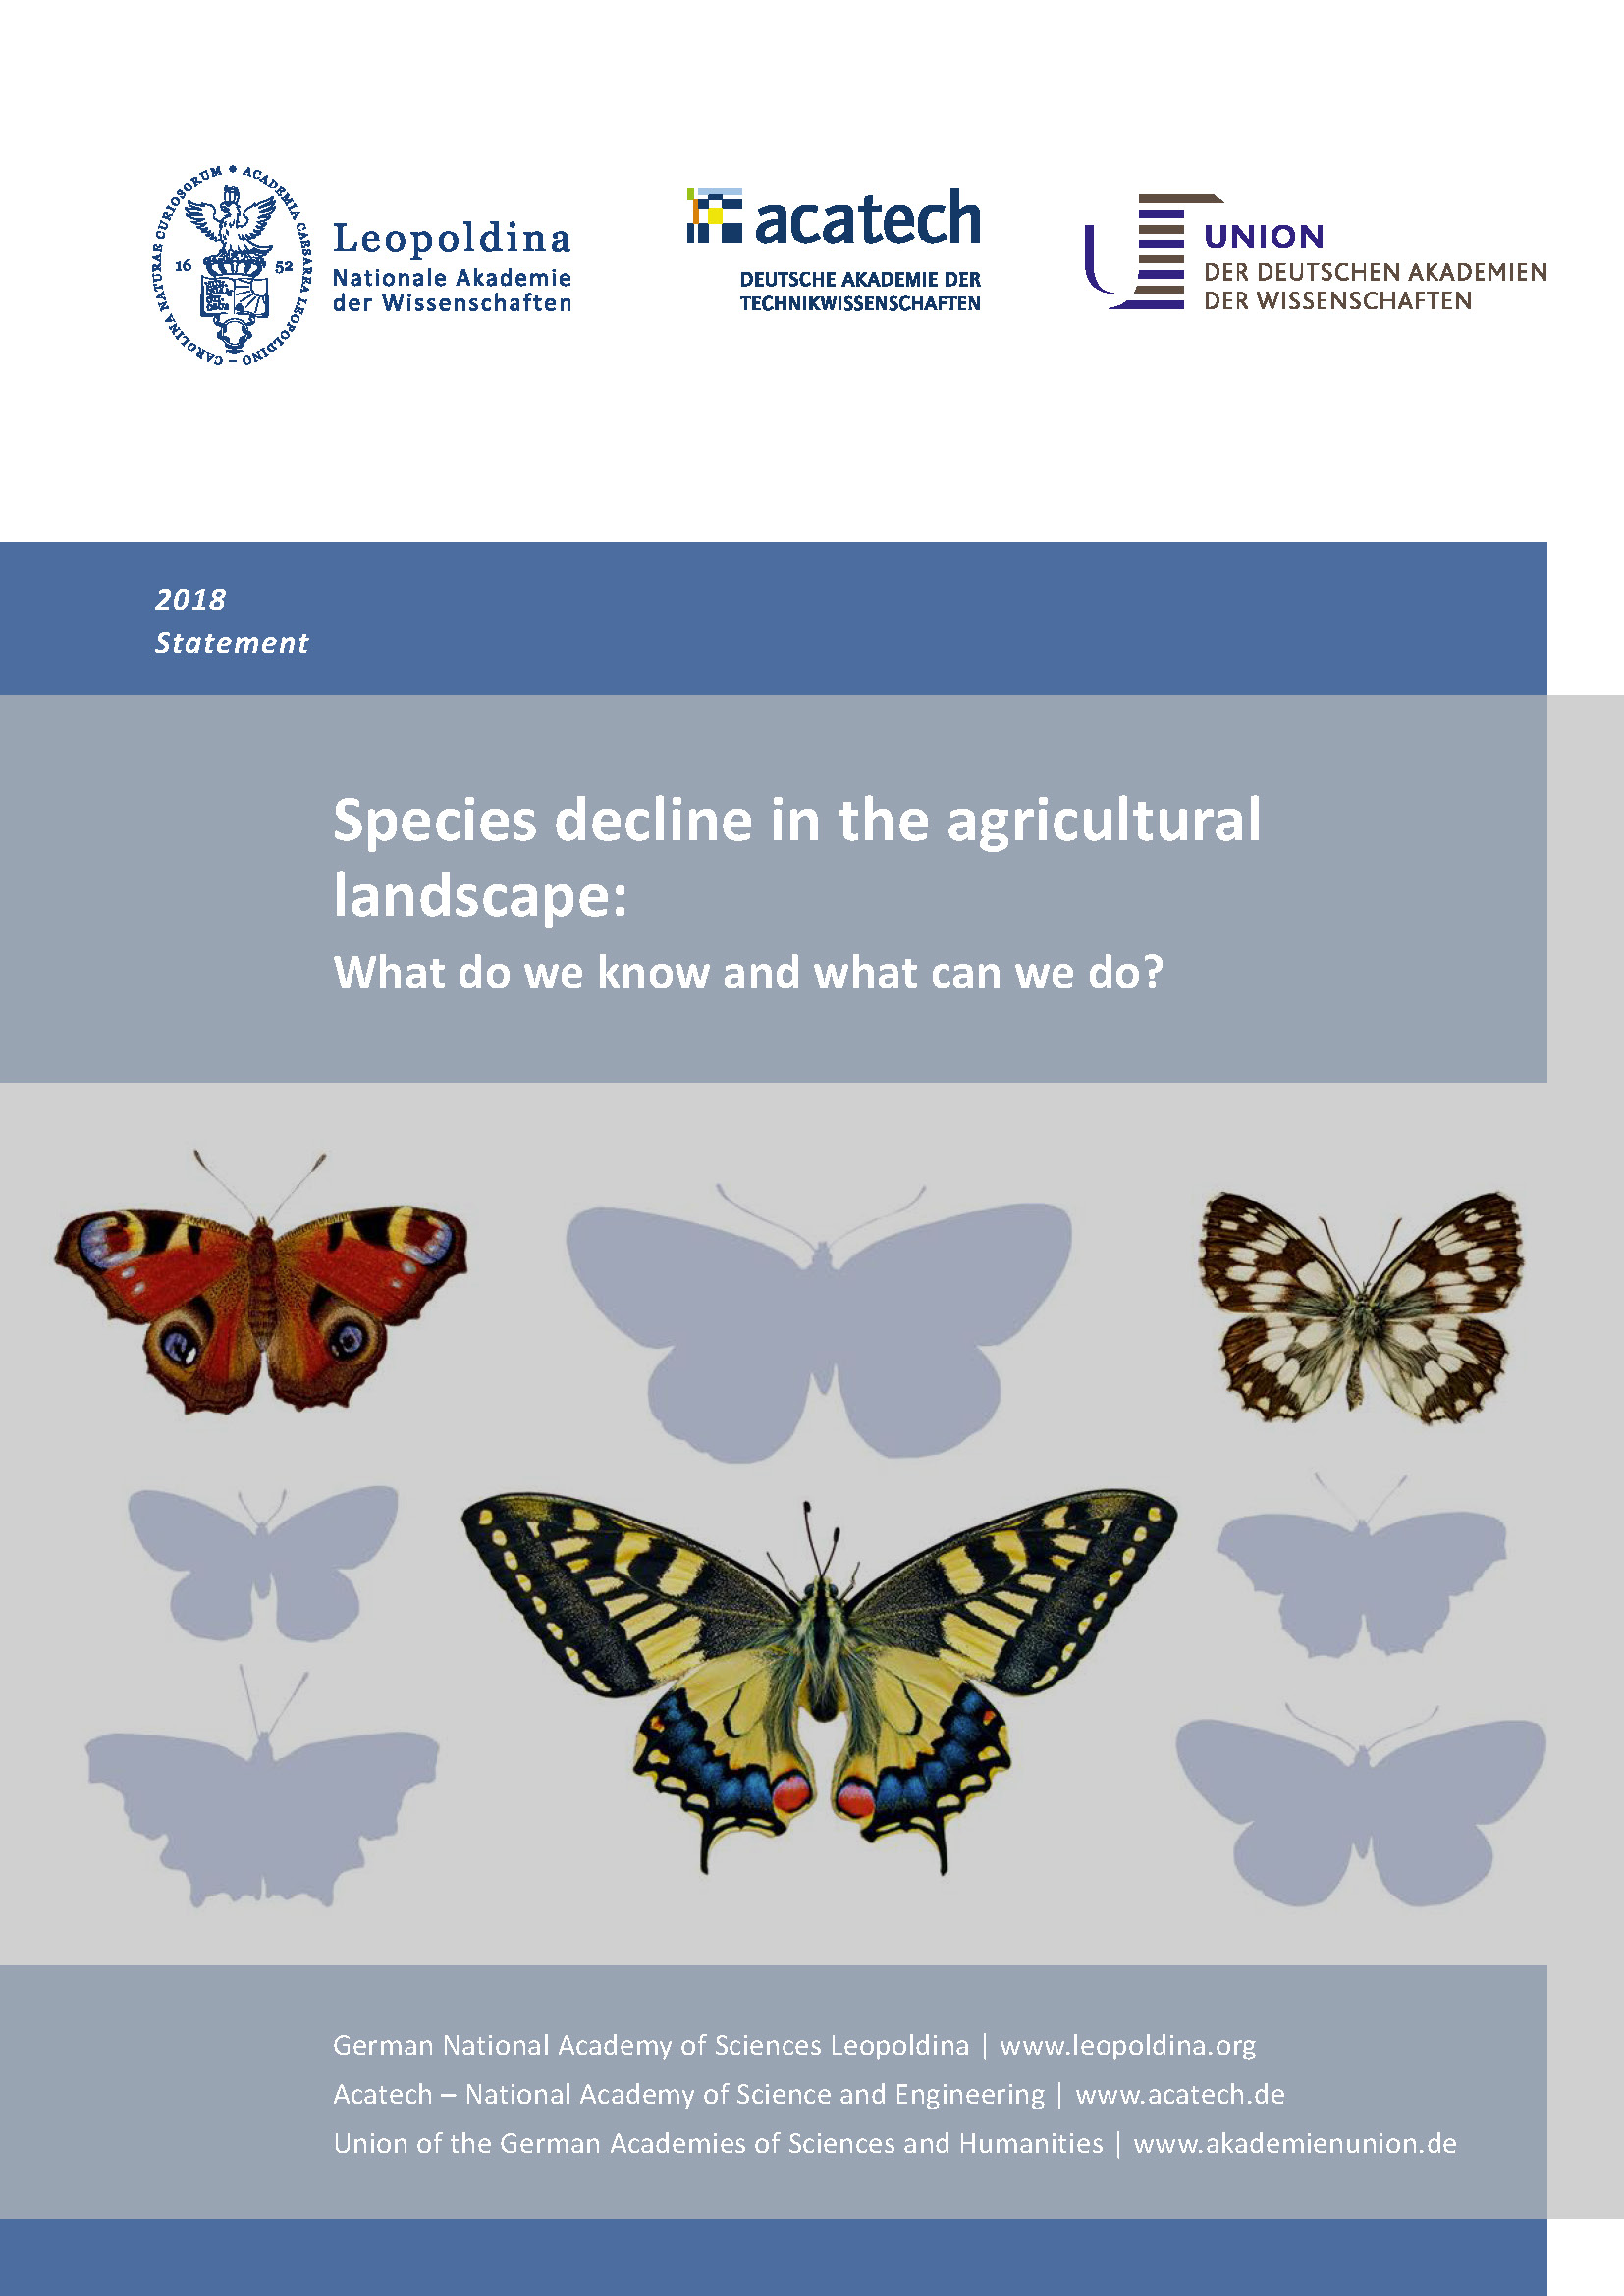 Cover of the publication "Species decline in the agricultural landscape - What do we know and what can we do?"